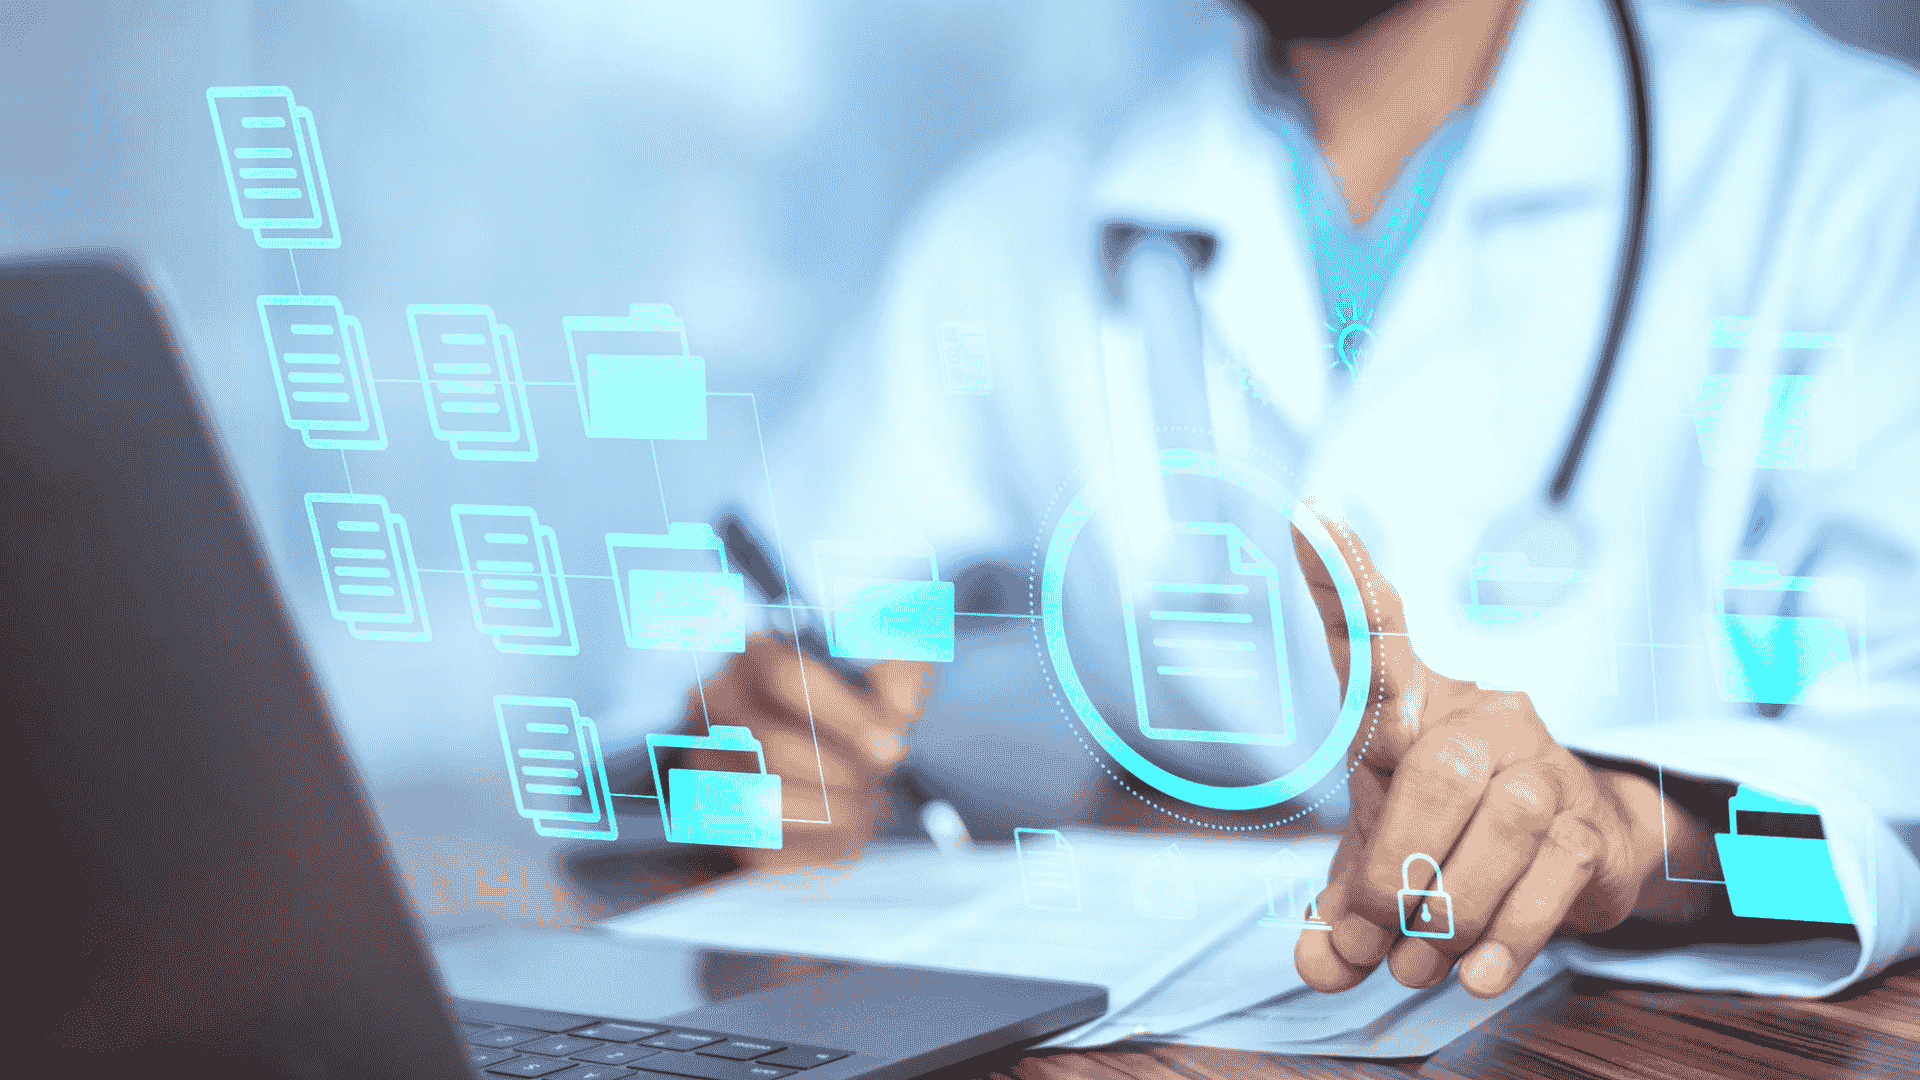 Patient Care Management Software: The future of healthcare